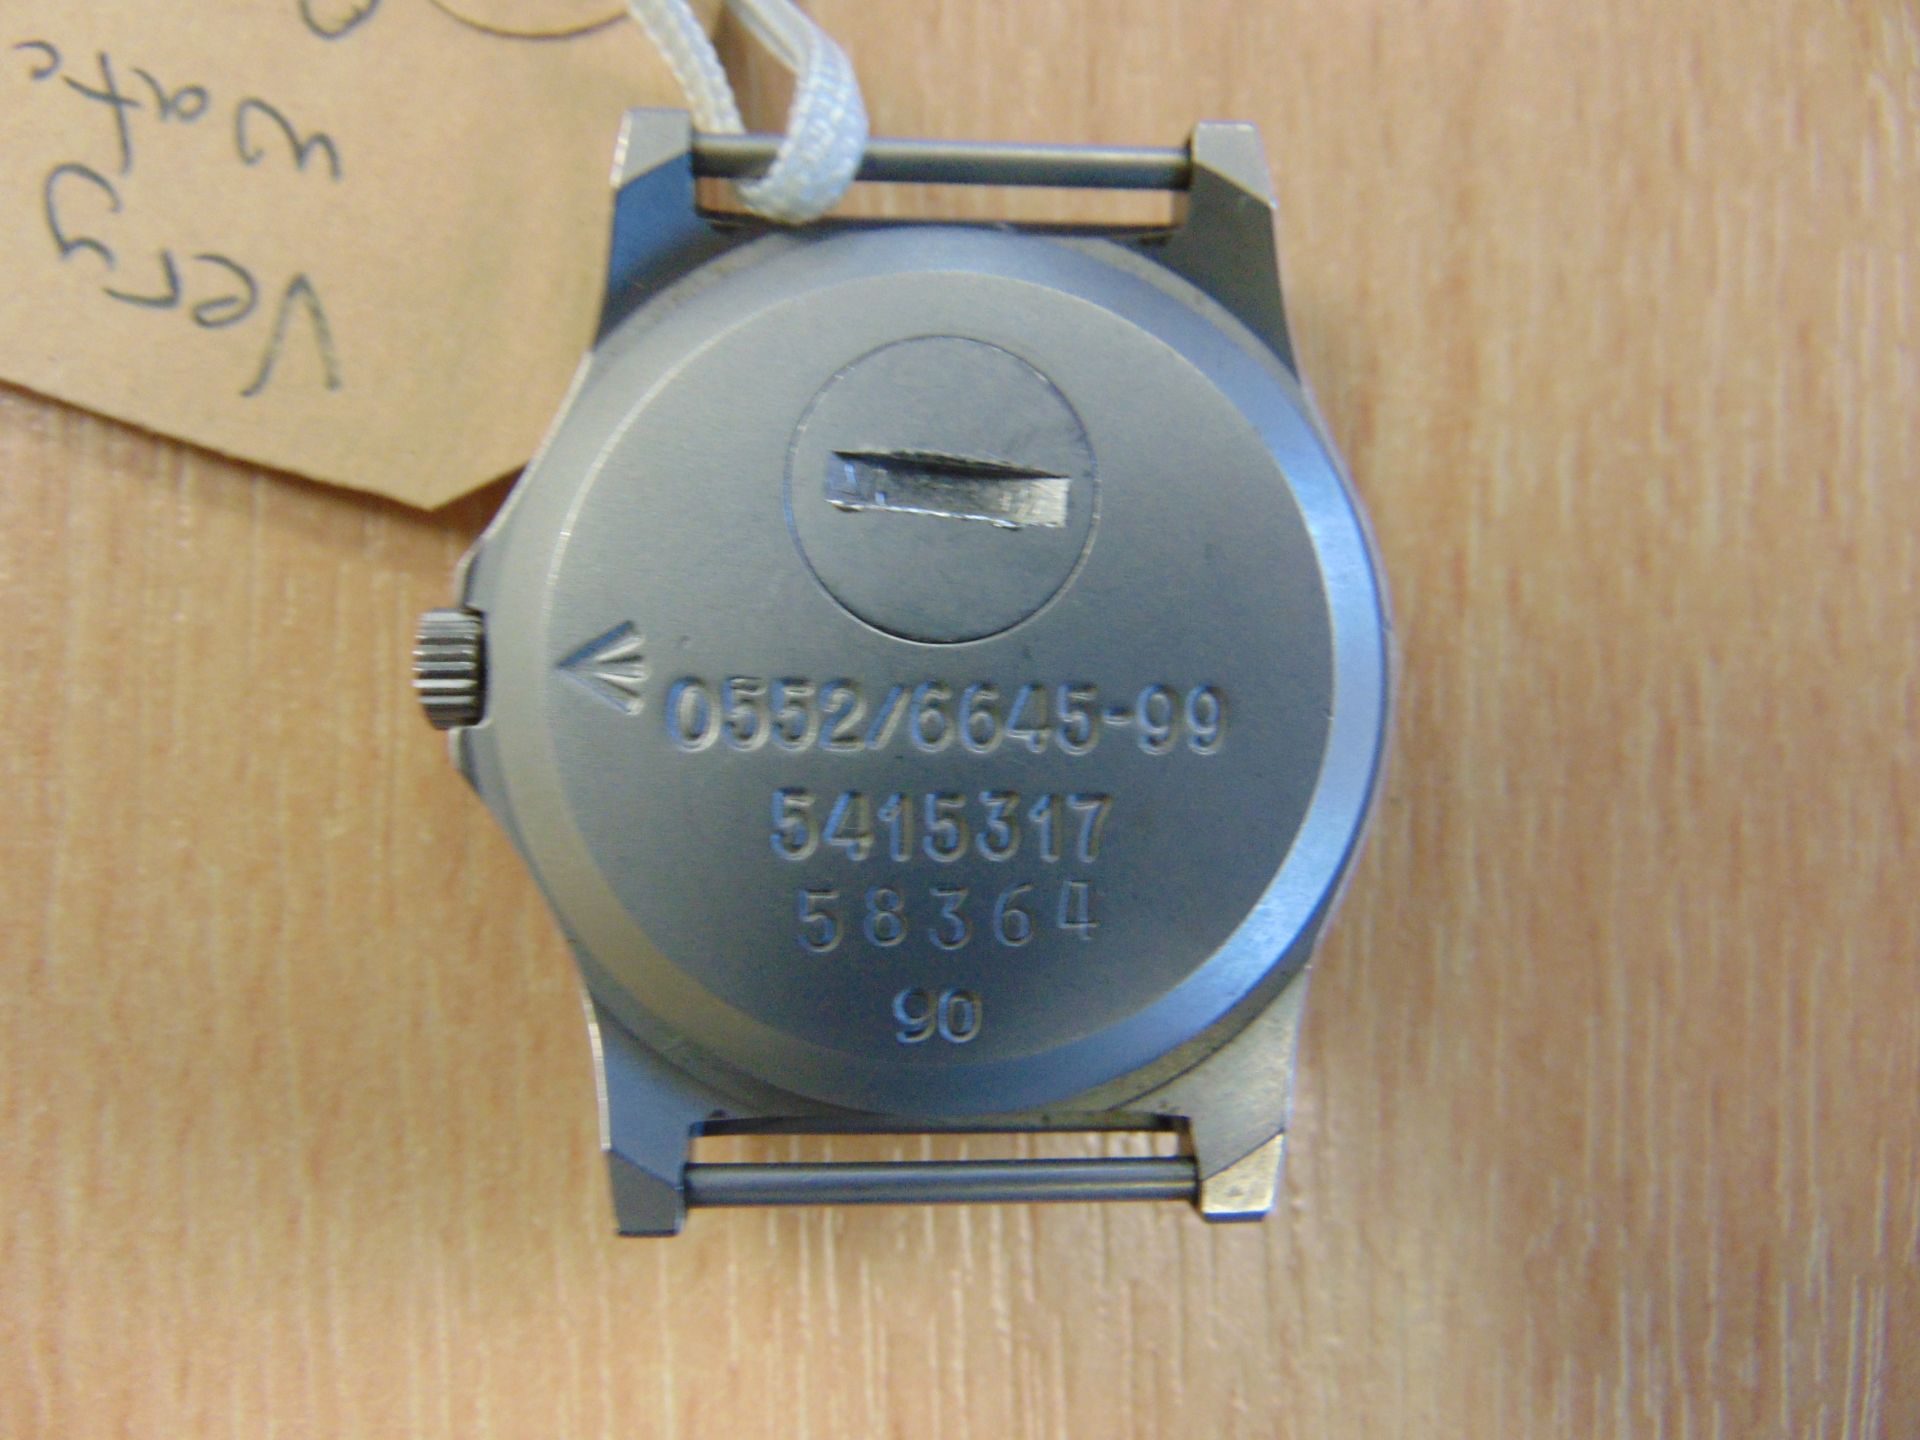 Very Rare CWC (Cabot Watch Co Switzerland) 0552 Royal Marines Service Watch, Nato Marks, Date 1990 - Image 3 of 4